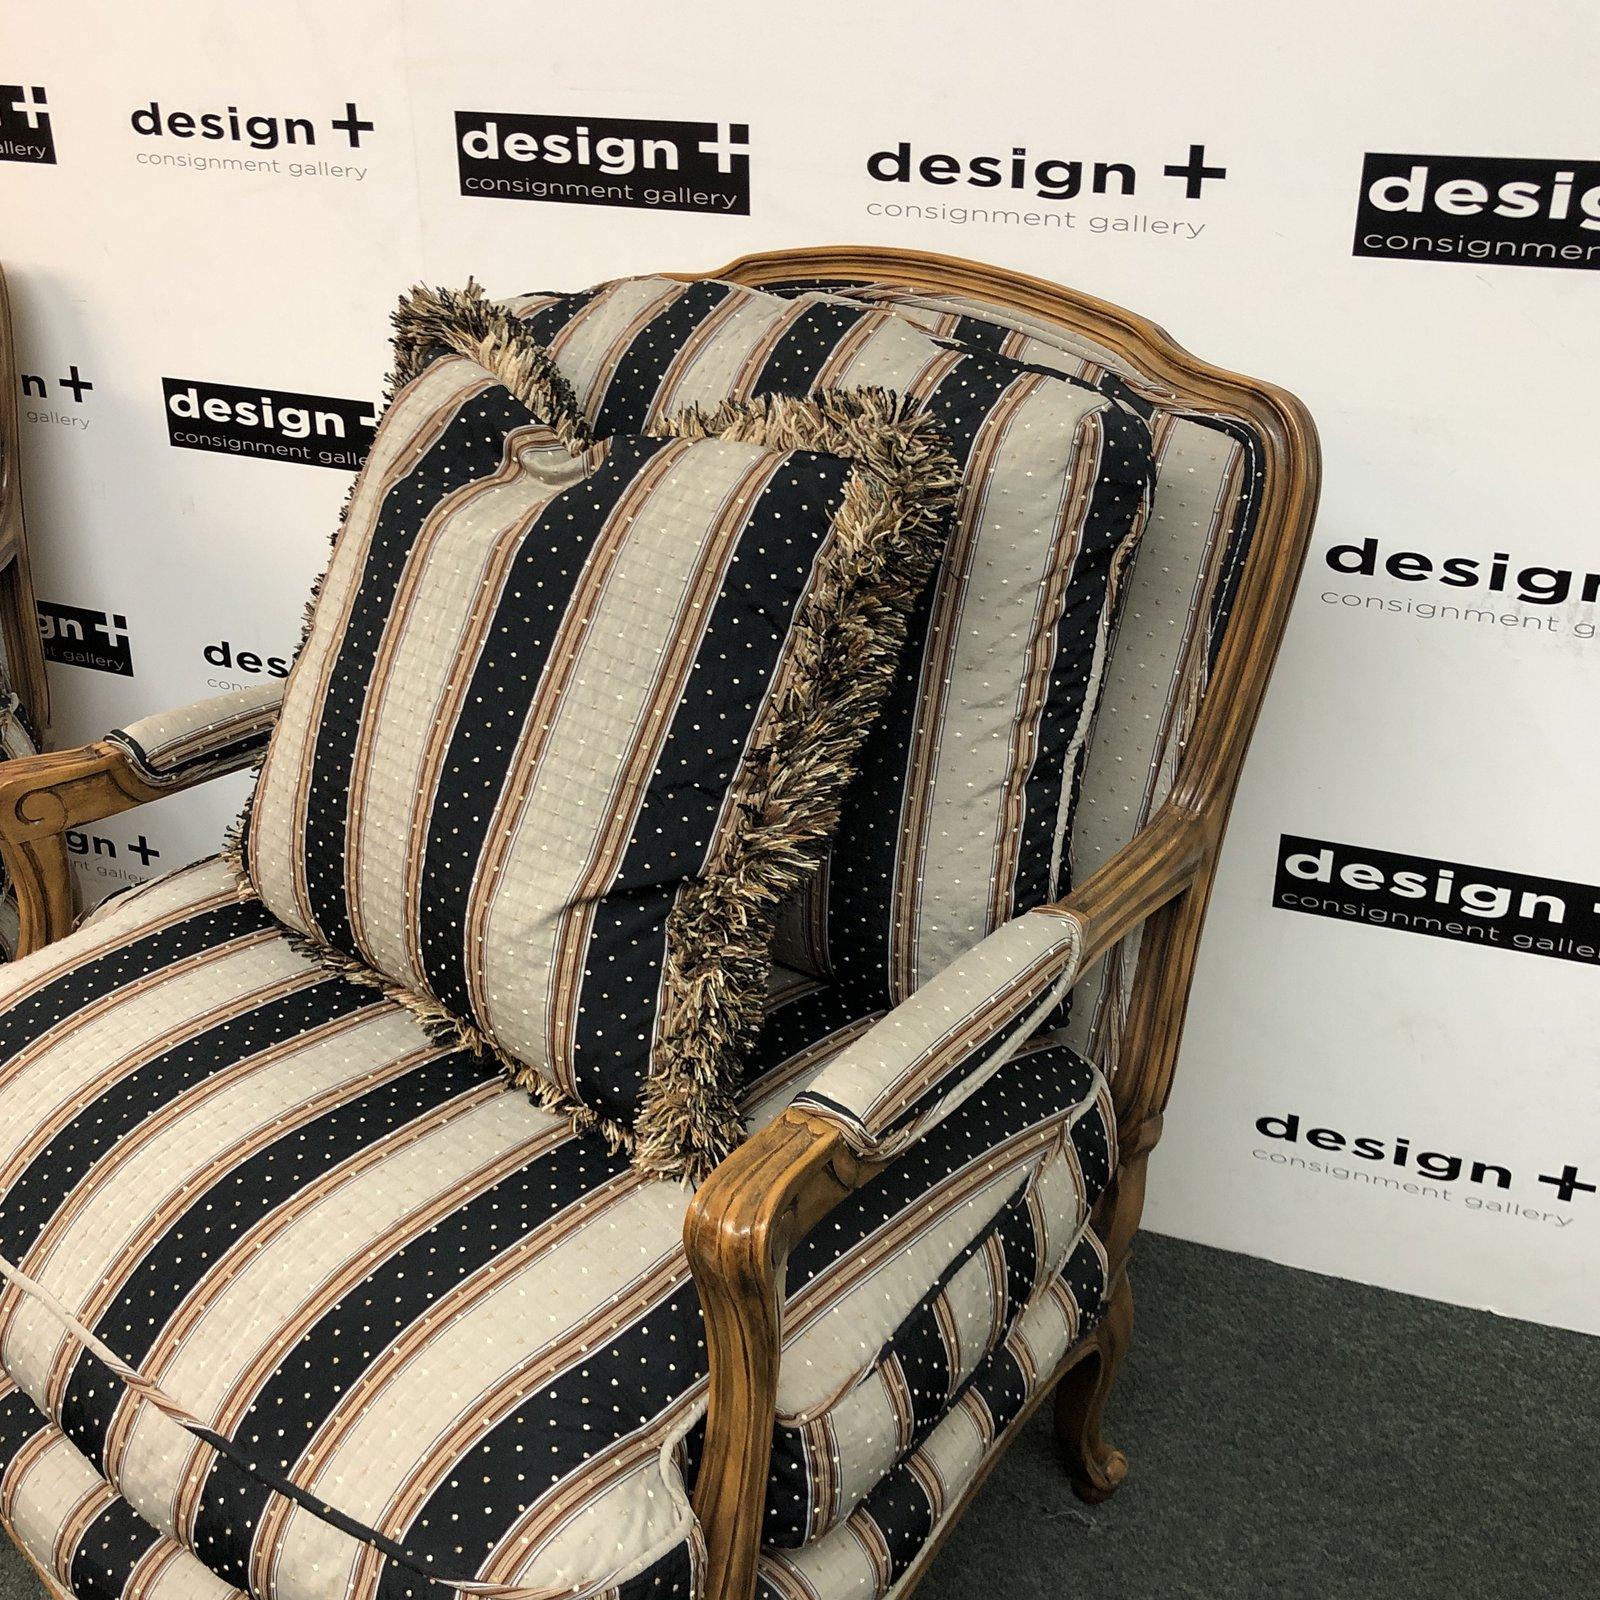 A pair of Bergere chairs from Baker Furniture. Upholstered in a bold contrasting stripe, the antique-oak finished framed pair exude elegance. Cushions and decor pillows are down filled.
Orig. Price $3,200
Ah 23.50
Sh 20.50.